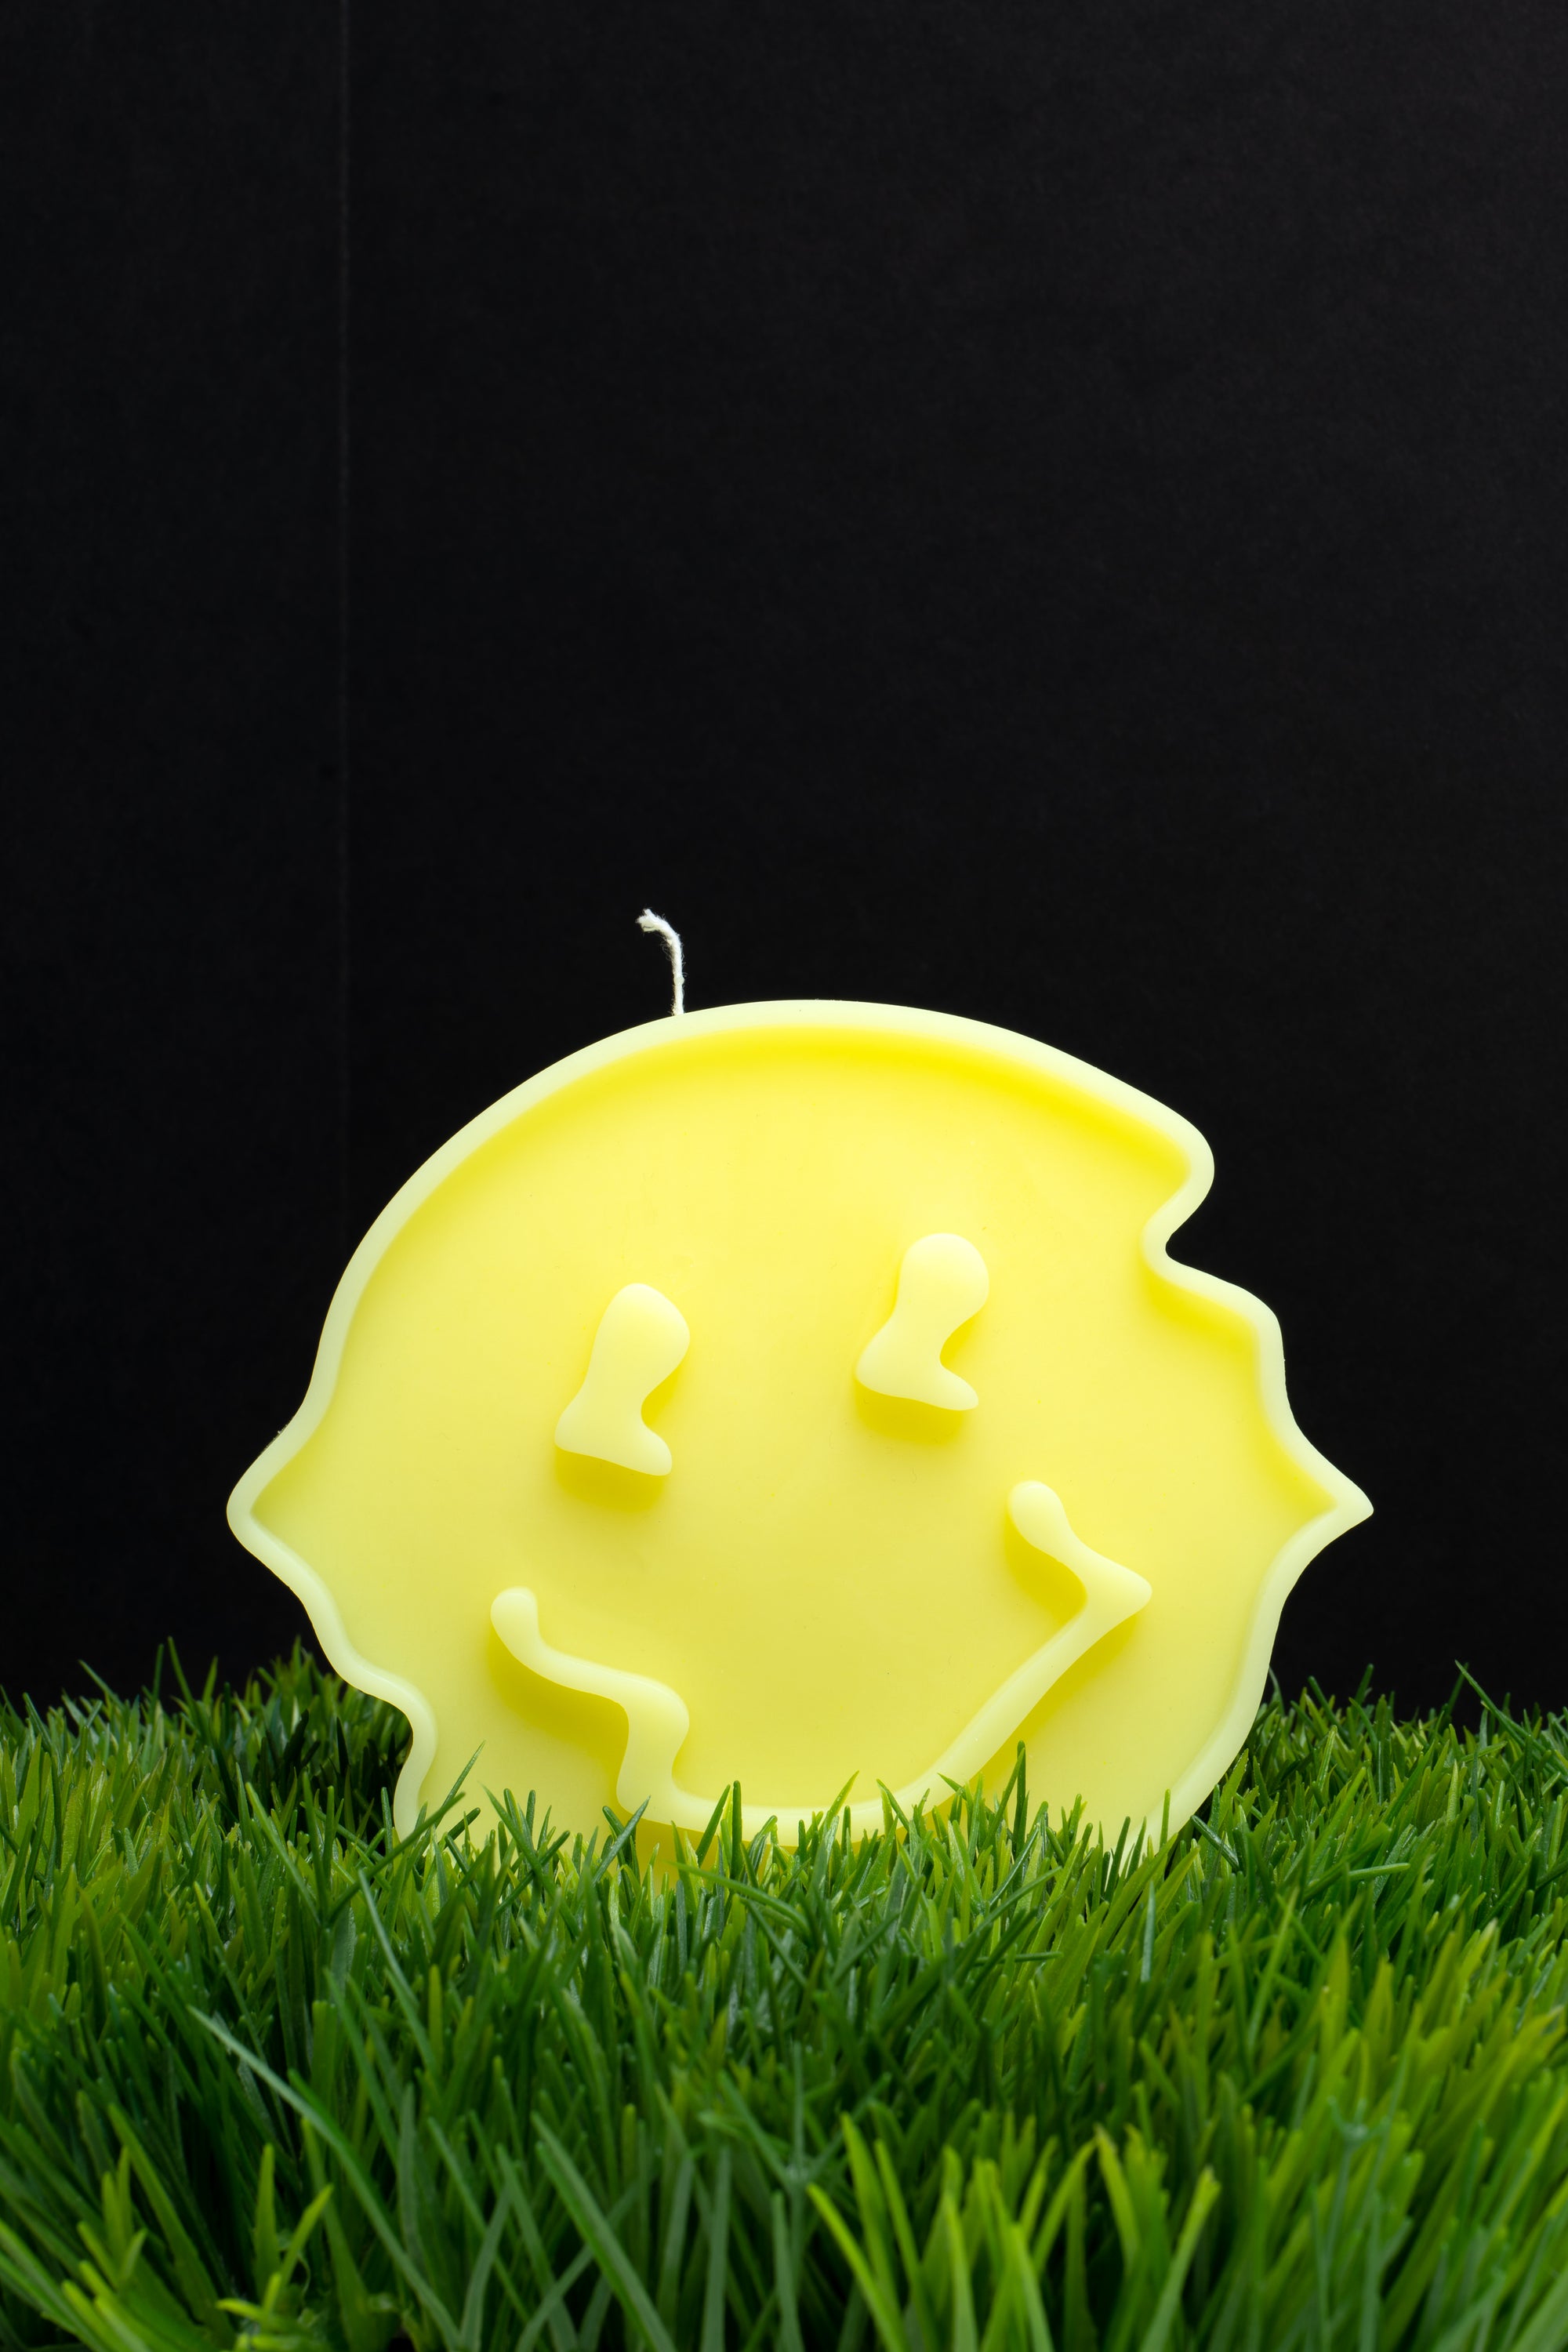 Funky Cute Windy Smile Face Candle Mold,smiley Sun Floral Candles